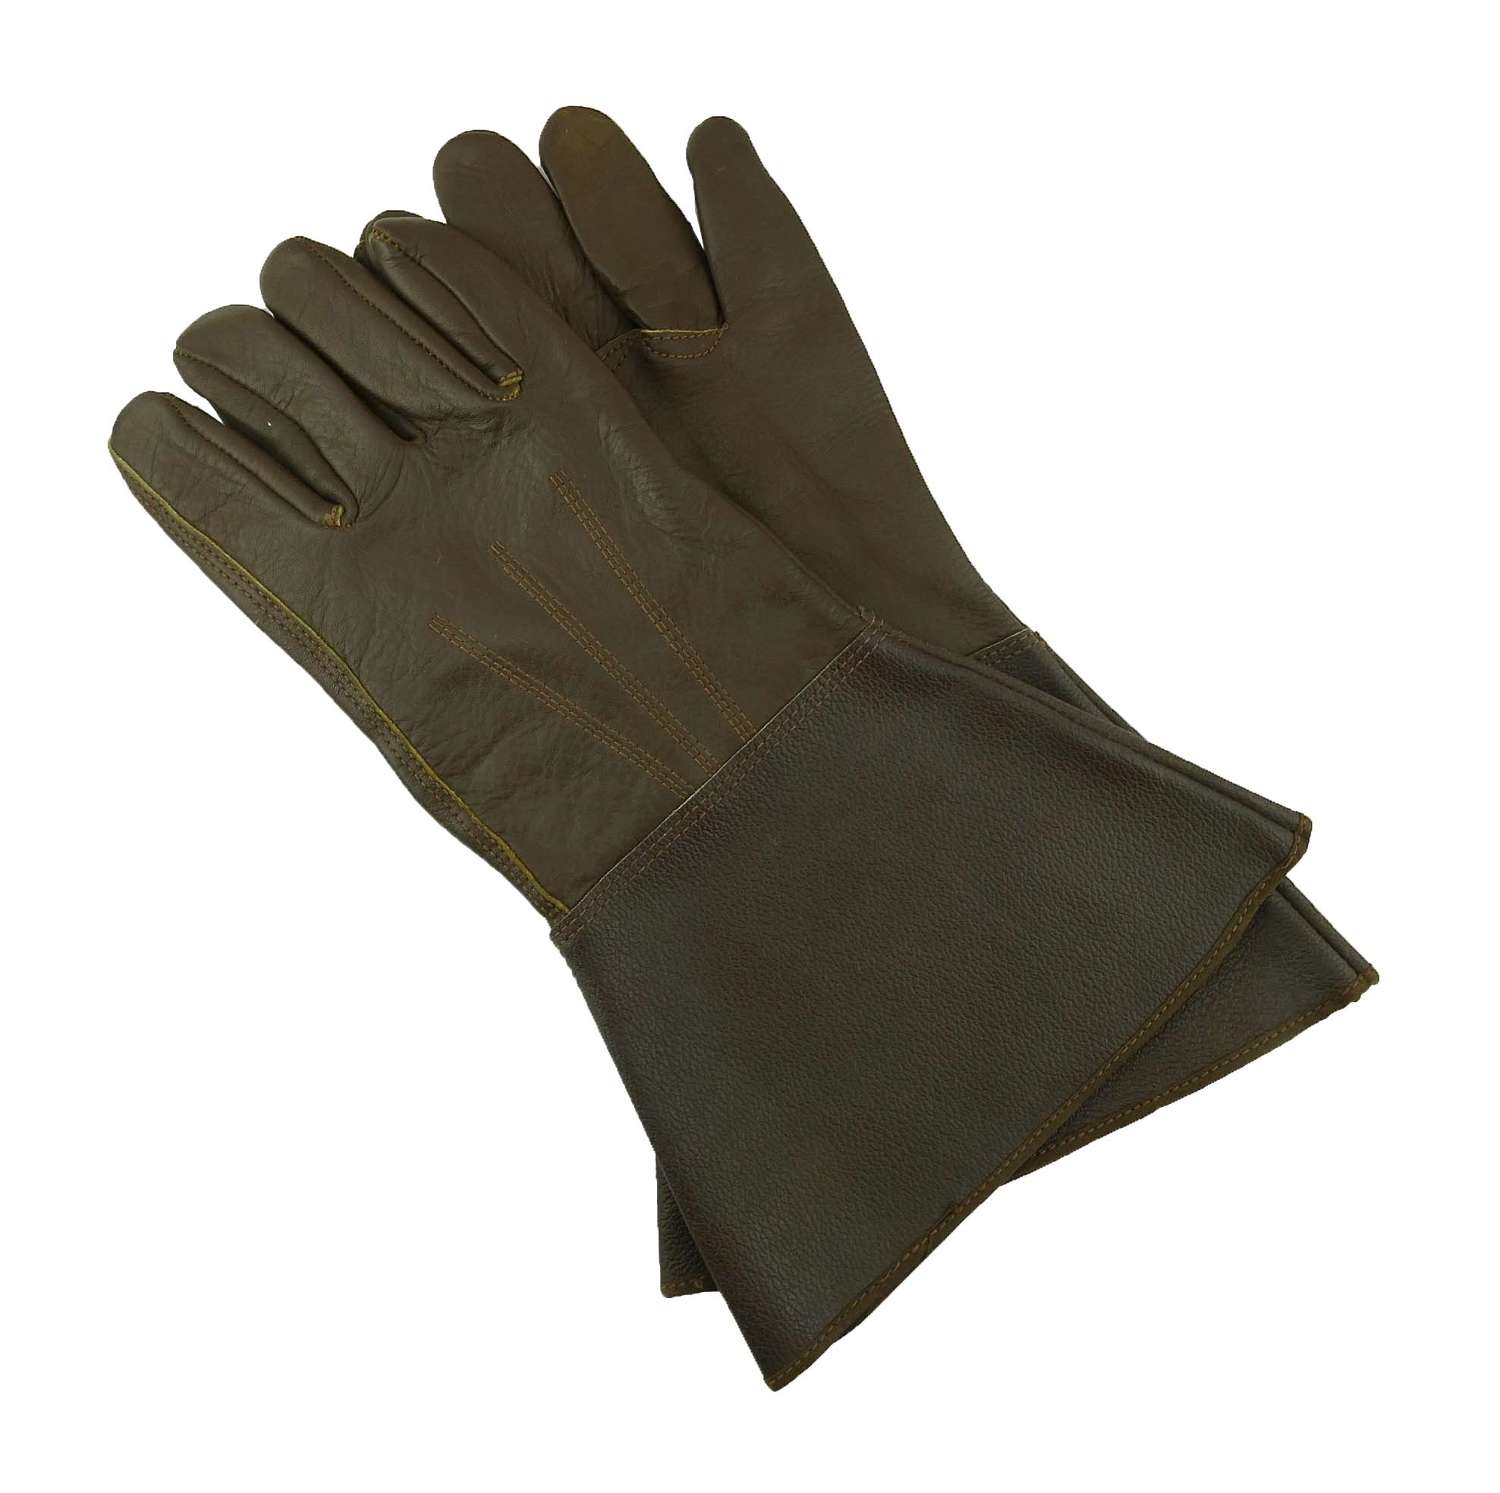 RAF Type B flying gauntlets, reproduction